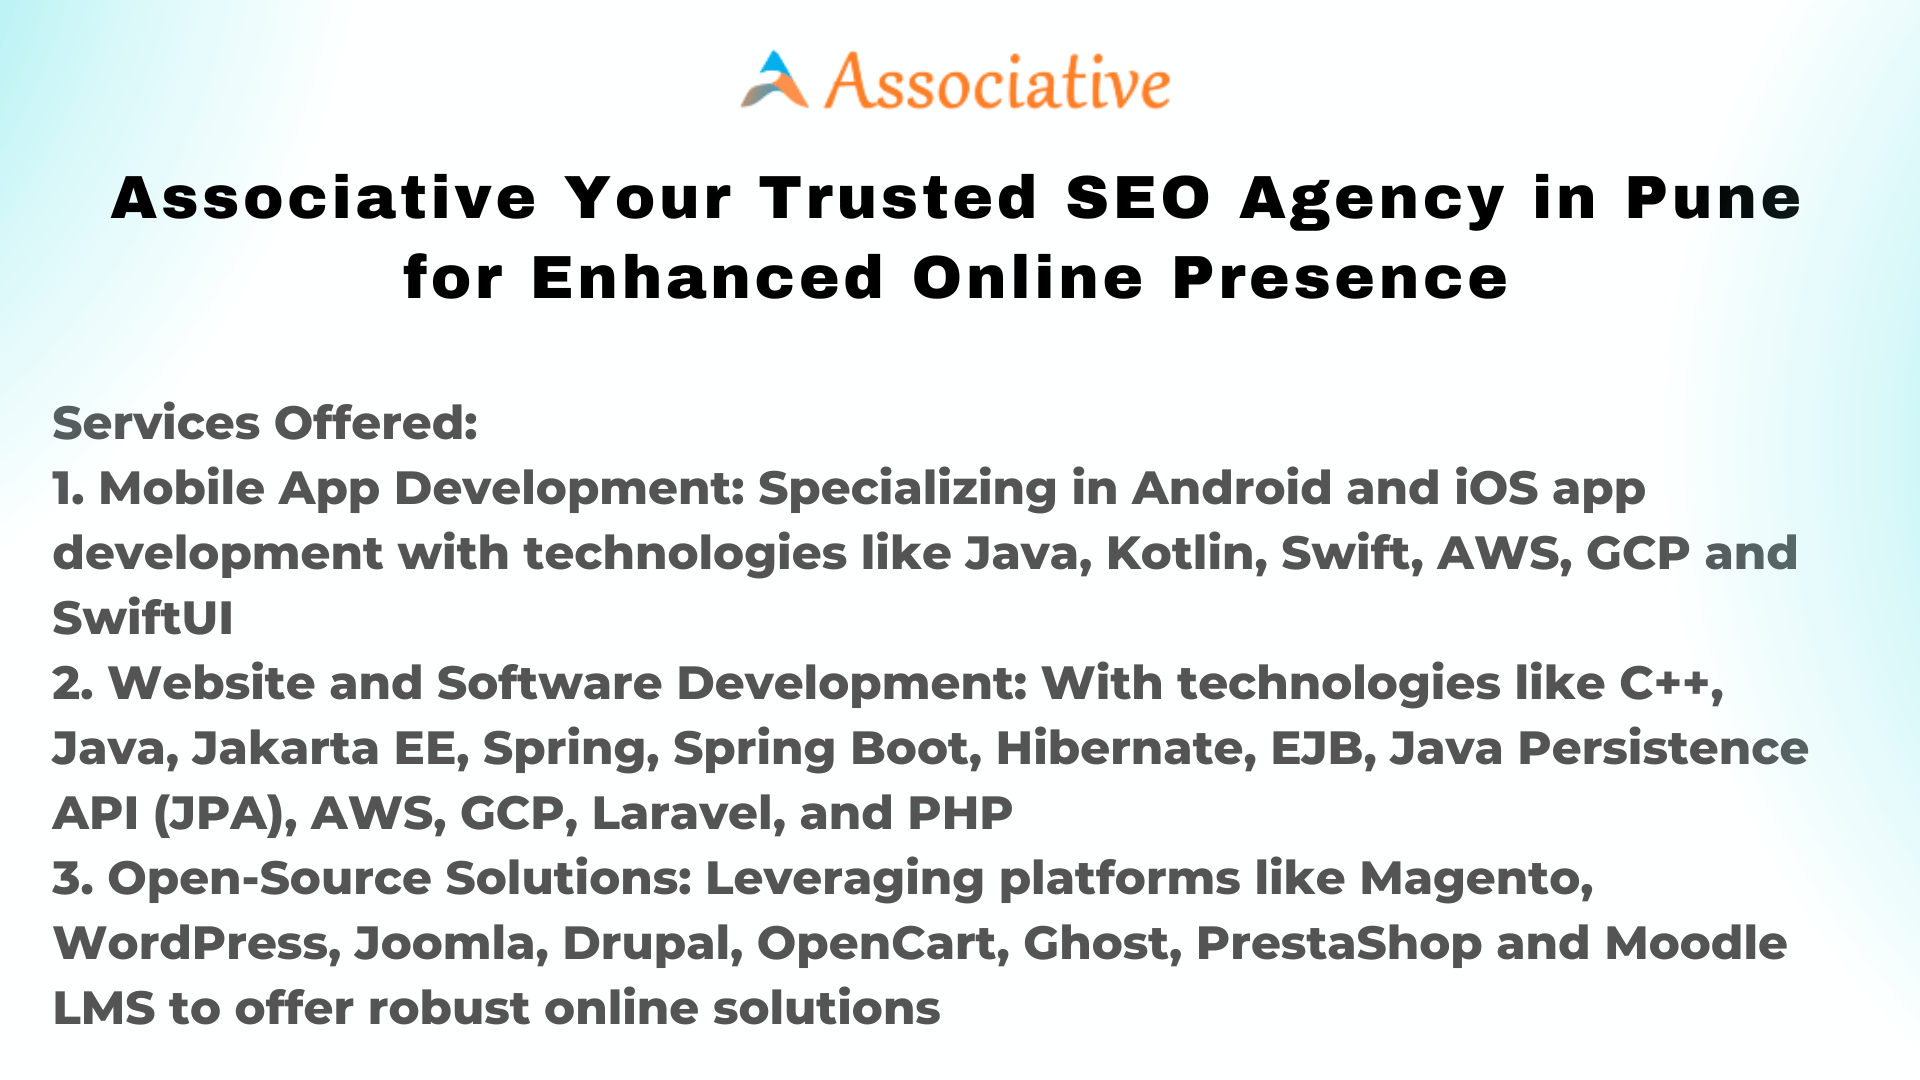 Associative Your Trusted SEO Agency in Pune for Enhanced Online Presence